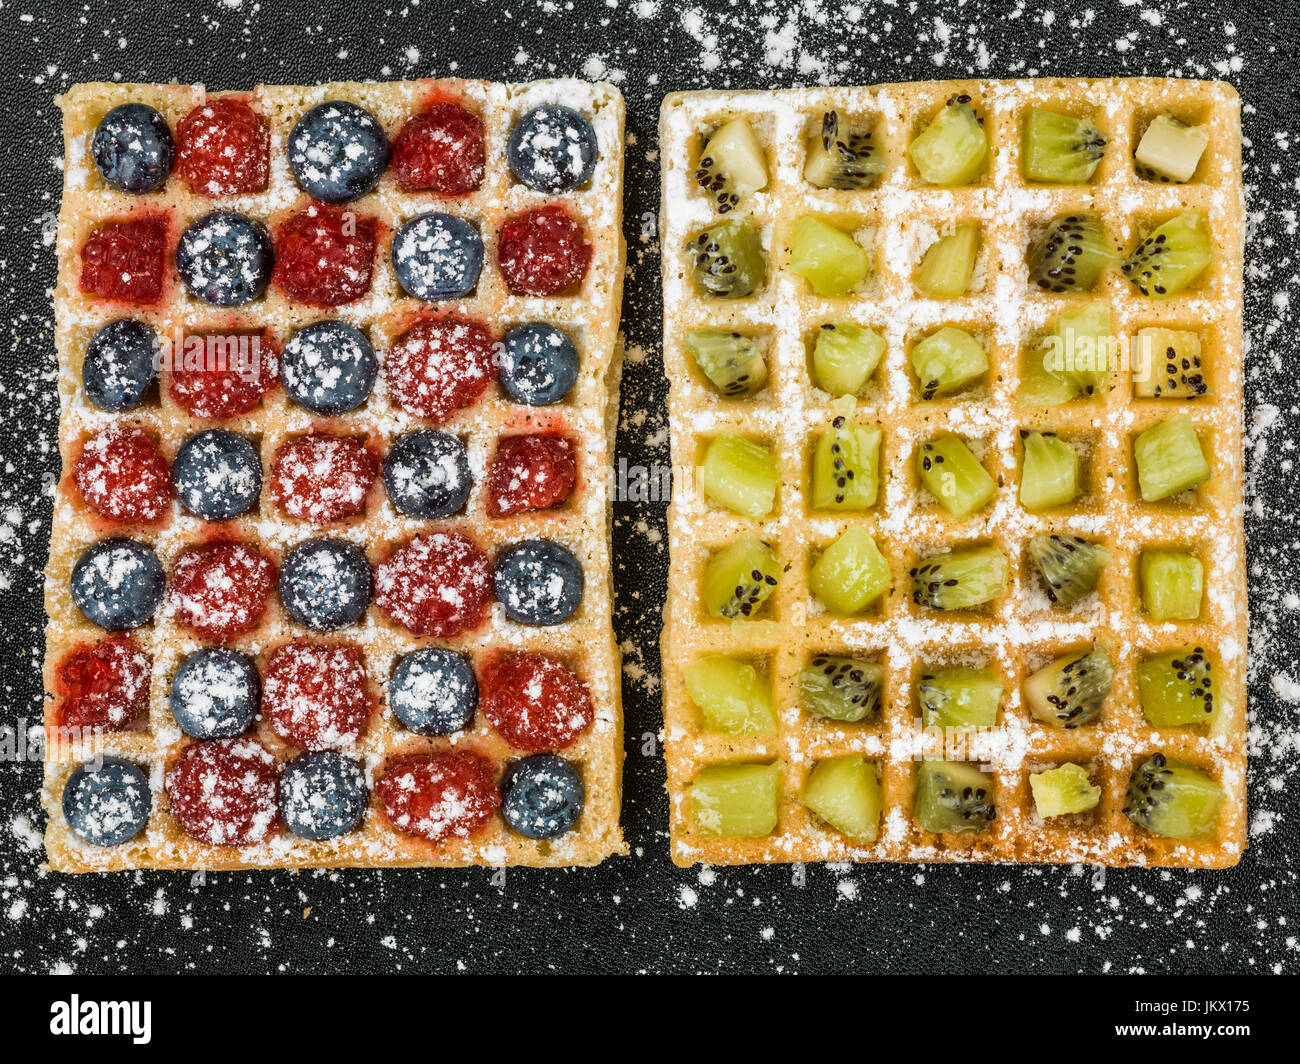 Fruit Waffles with Raspberries Blueberries and Kiwi Fruit and Icing Sugar Against a Black Background Stock Photo